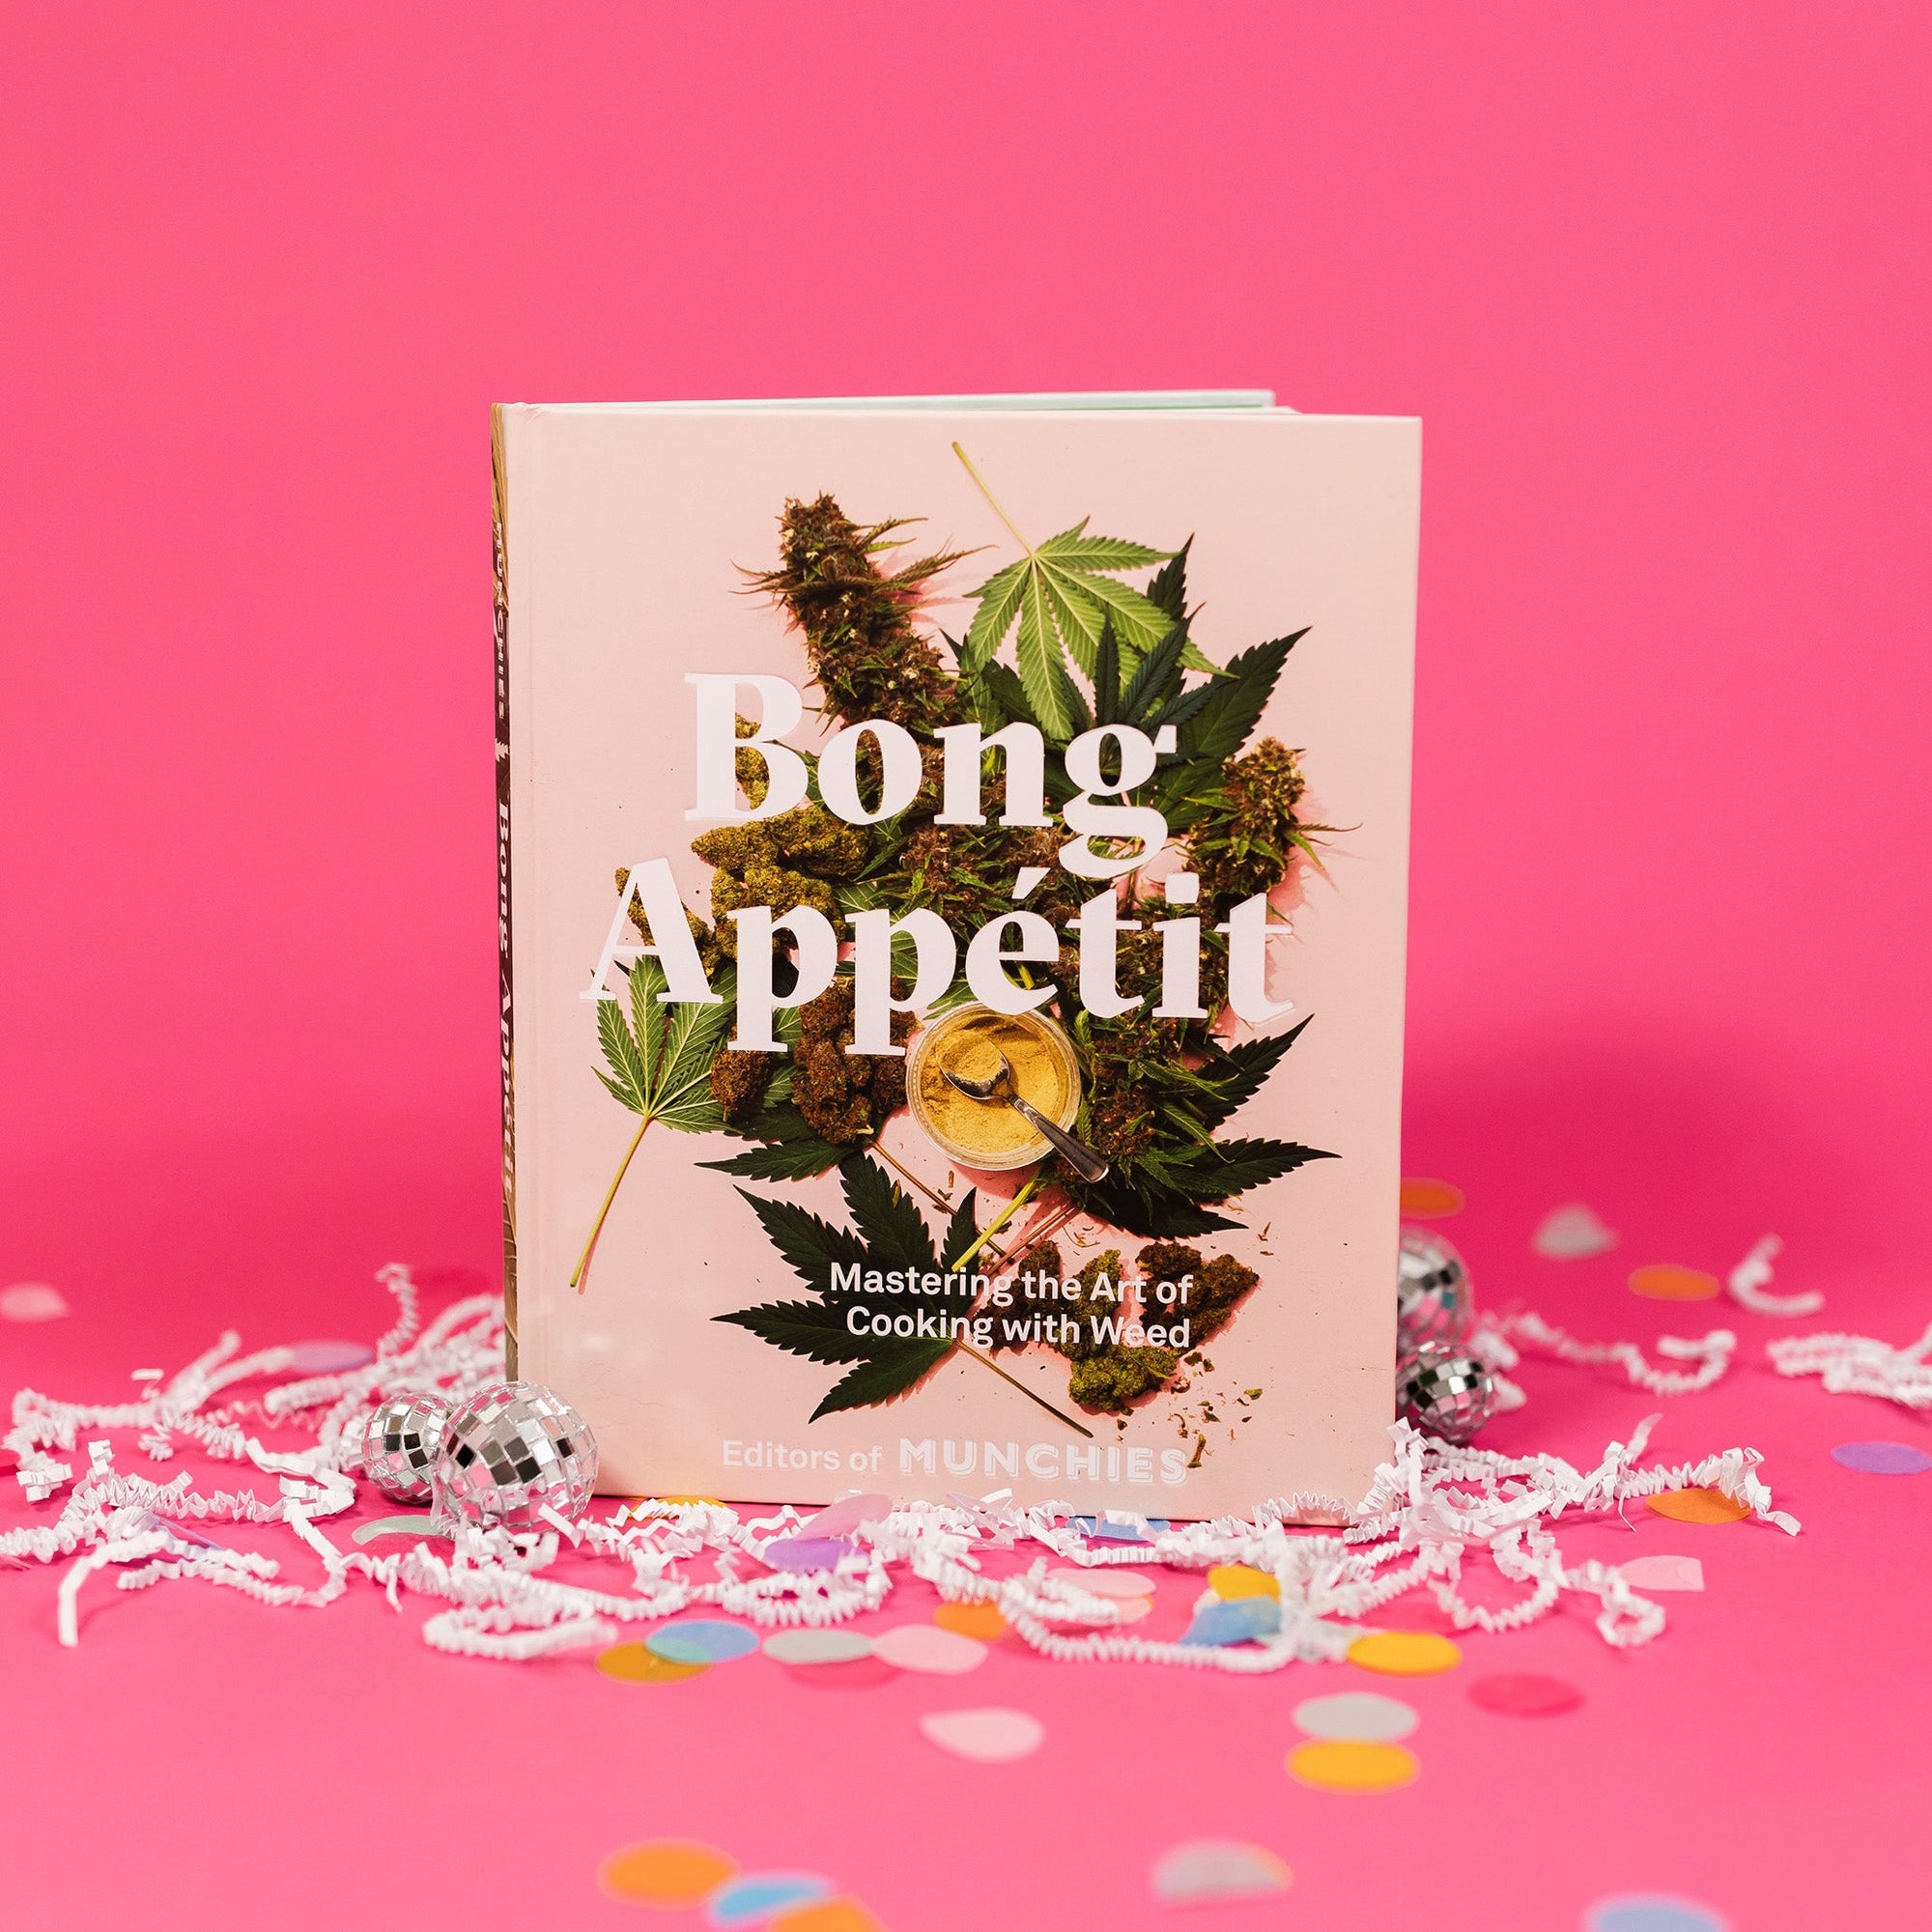 hot pink background sits a light pink book with white crinkle and big, colorful confetti. There are mini disco balls. It has a picture of marijuana leaves, marijuana buds, a jar of powdered marijana with a spoon and it says "Bong Appetit" in white, bold serif lettering. It also says at the bottom "Mastering the Art of Cooking with Weed" in white, block lettering. It is by the Editors of MUNCHIES.